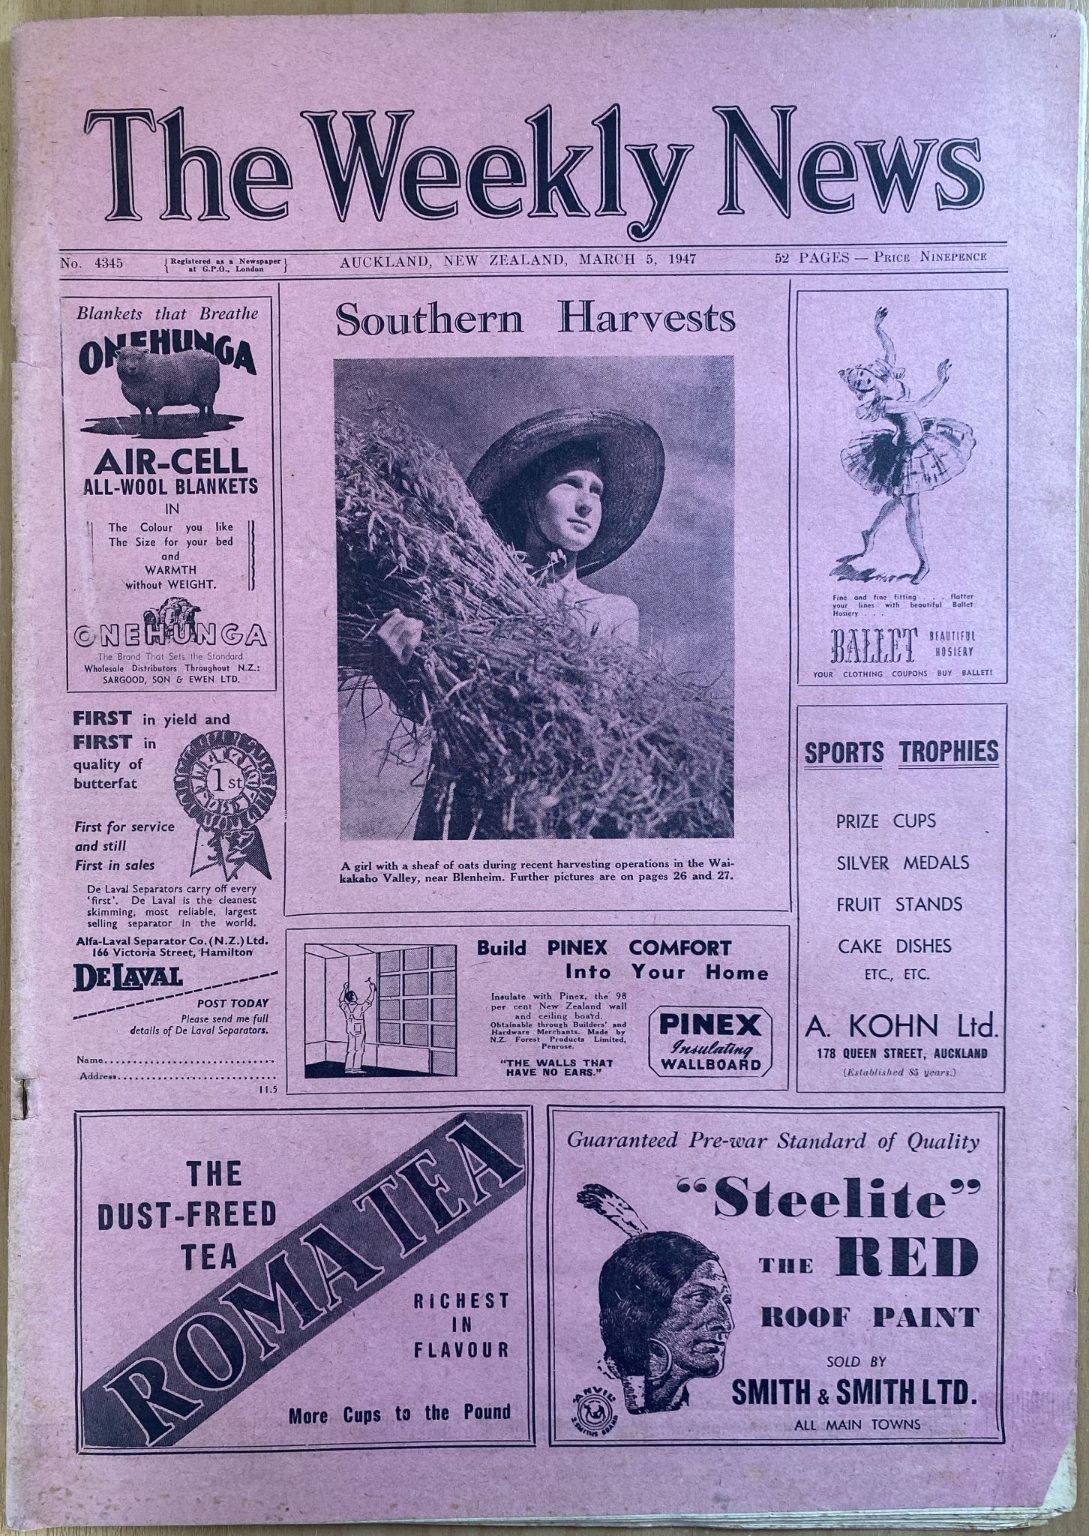 OLD NEWSPAPER: The Weekly News, No. 4345, 5 March 1947